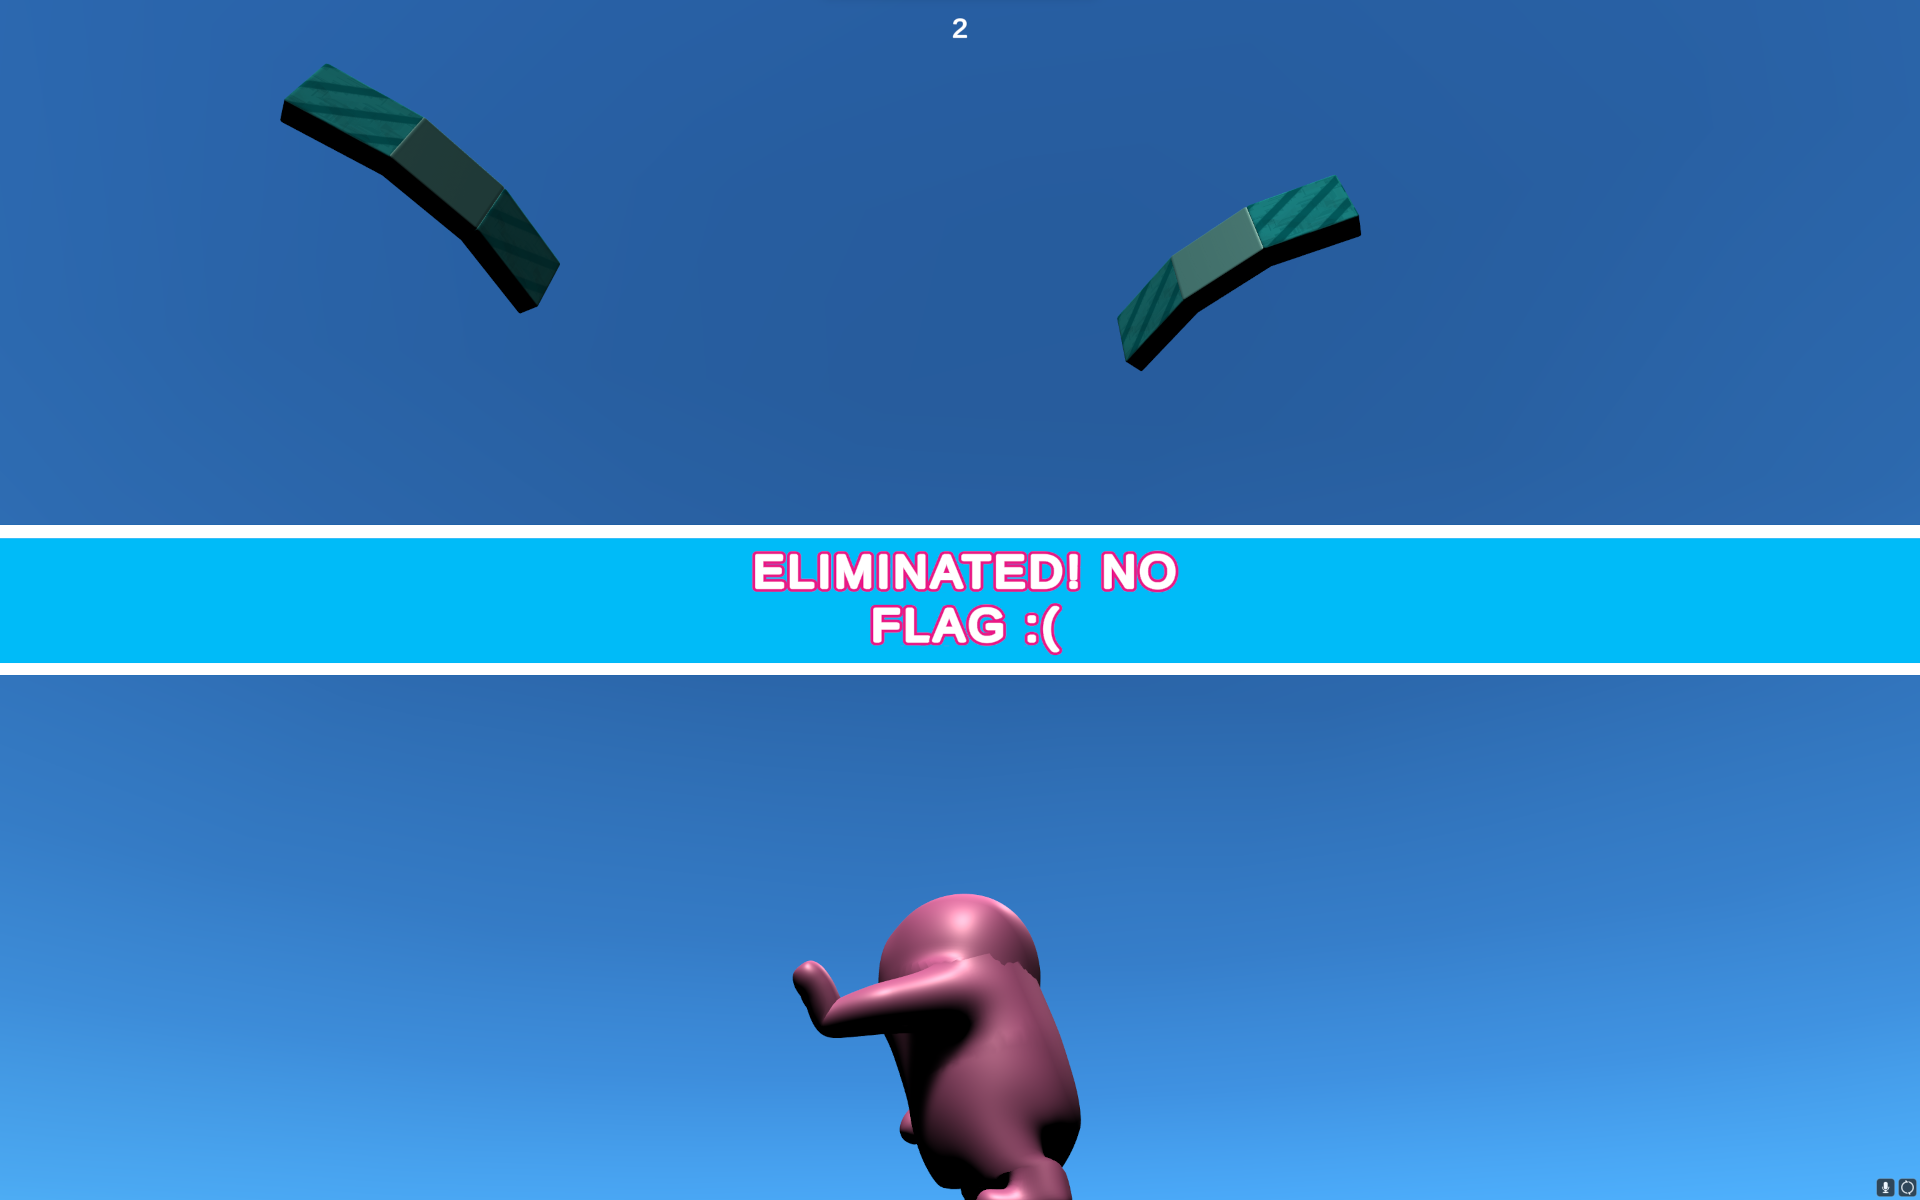 Eliminated screen.